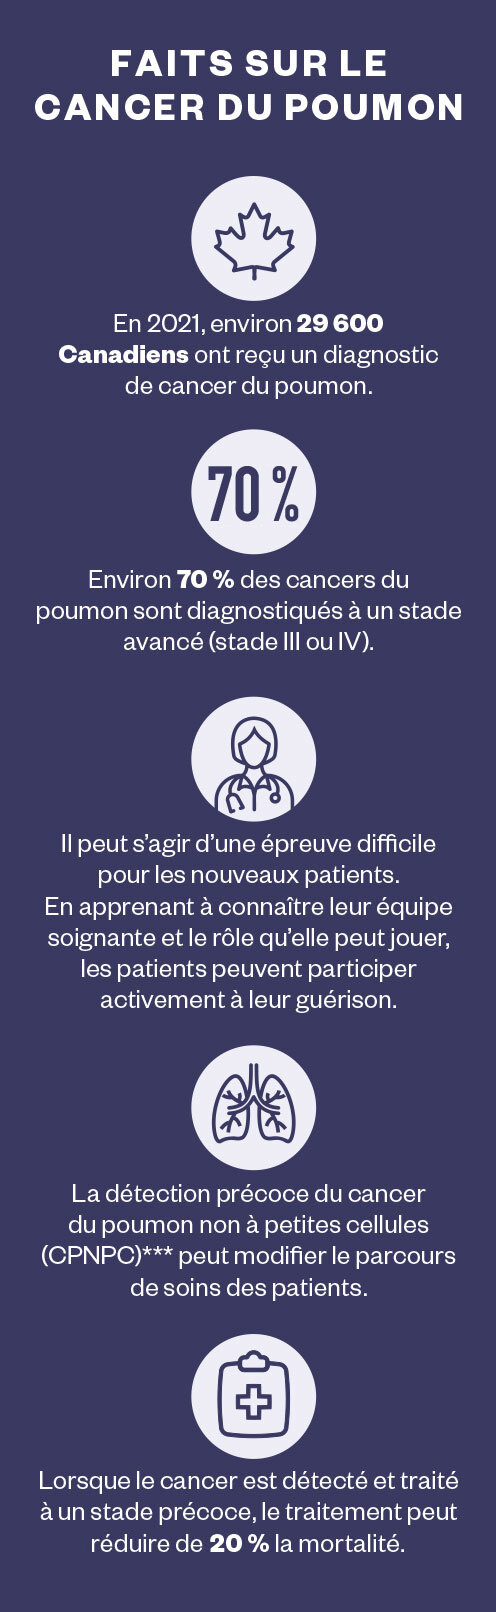 facts-on-lung-cancer-fr